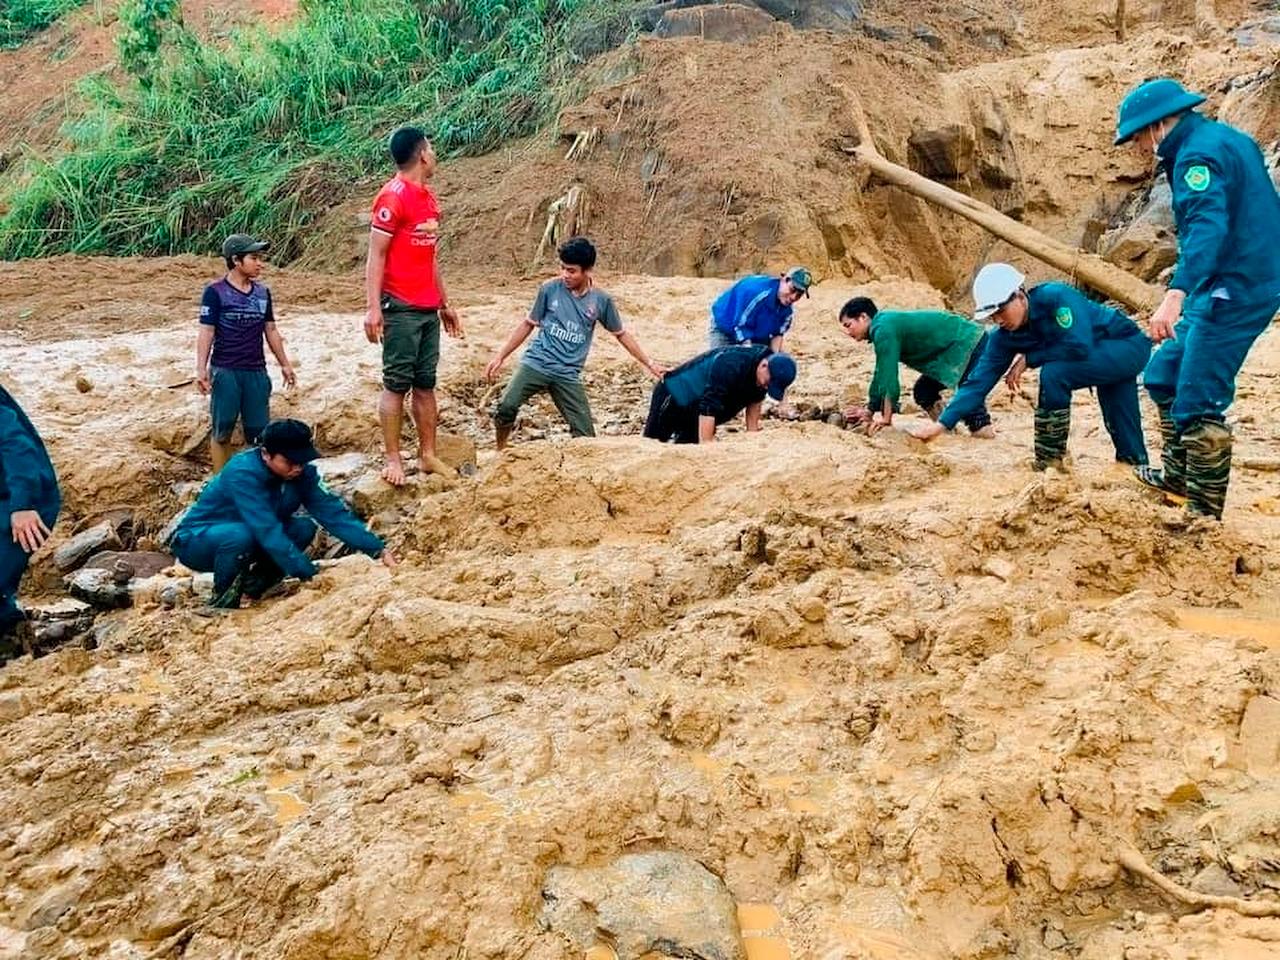 Soldiers and villagers dig through mud after a landslide swamps a village in Phuoc Loc district, Quang Nam province, Vietnam on Oct 29. Three separate landslides triggered by typhoon Molave killed over a dozen villagers and left dozens more missing in the province. Photo: AP